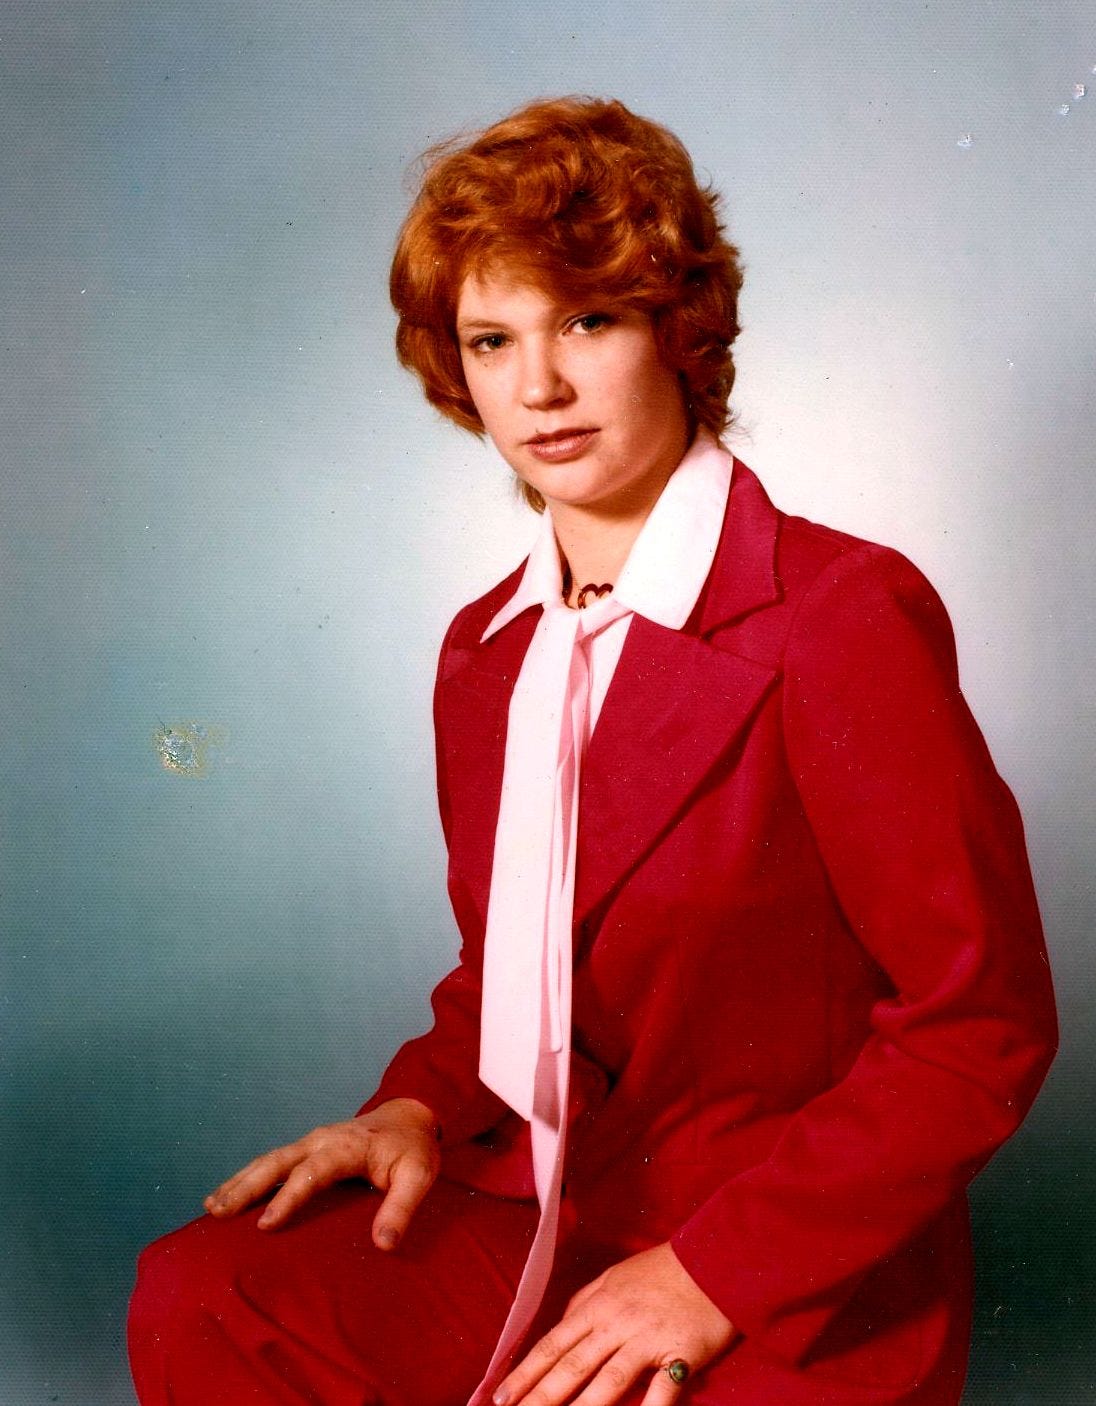 A young woman dressed in a red suit looks towards the camera.